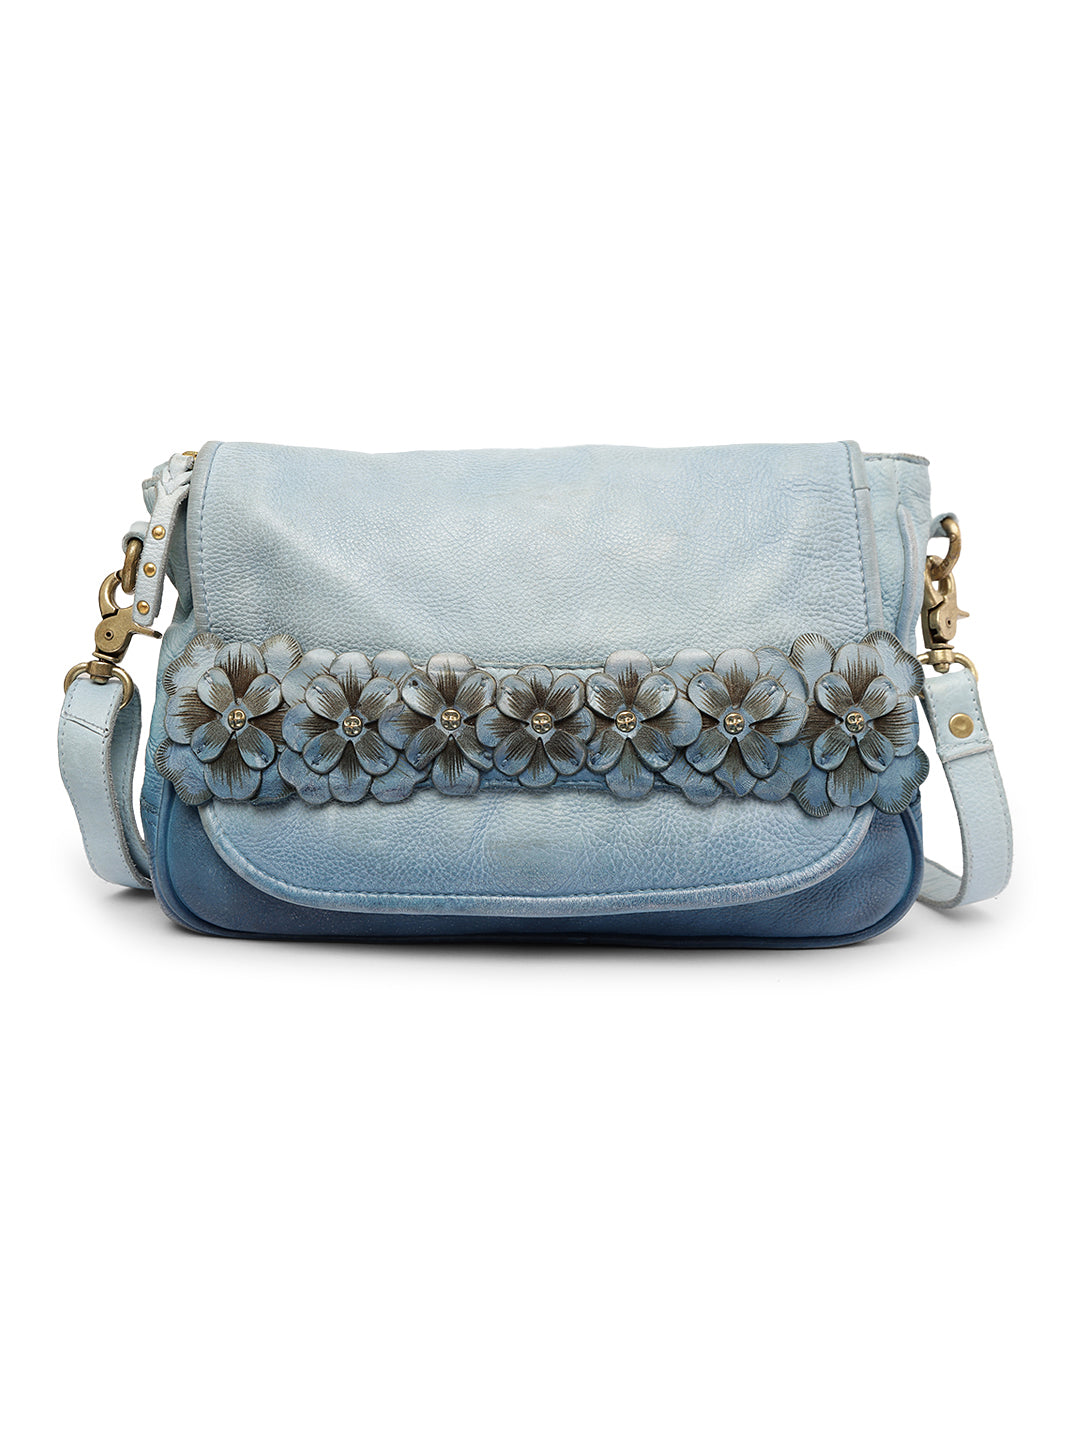 Discover Azure Aster: Luxurious Blue Leather Crossbody for Effortless Elegance